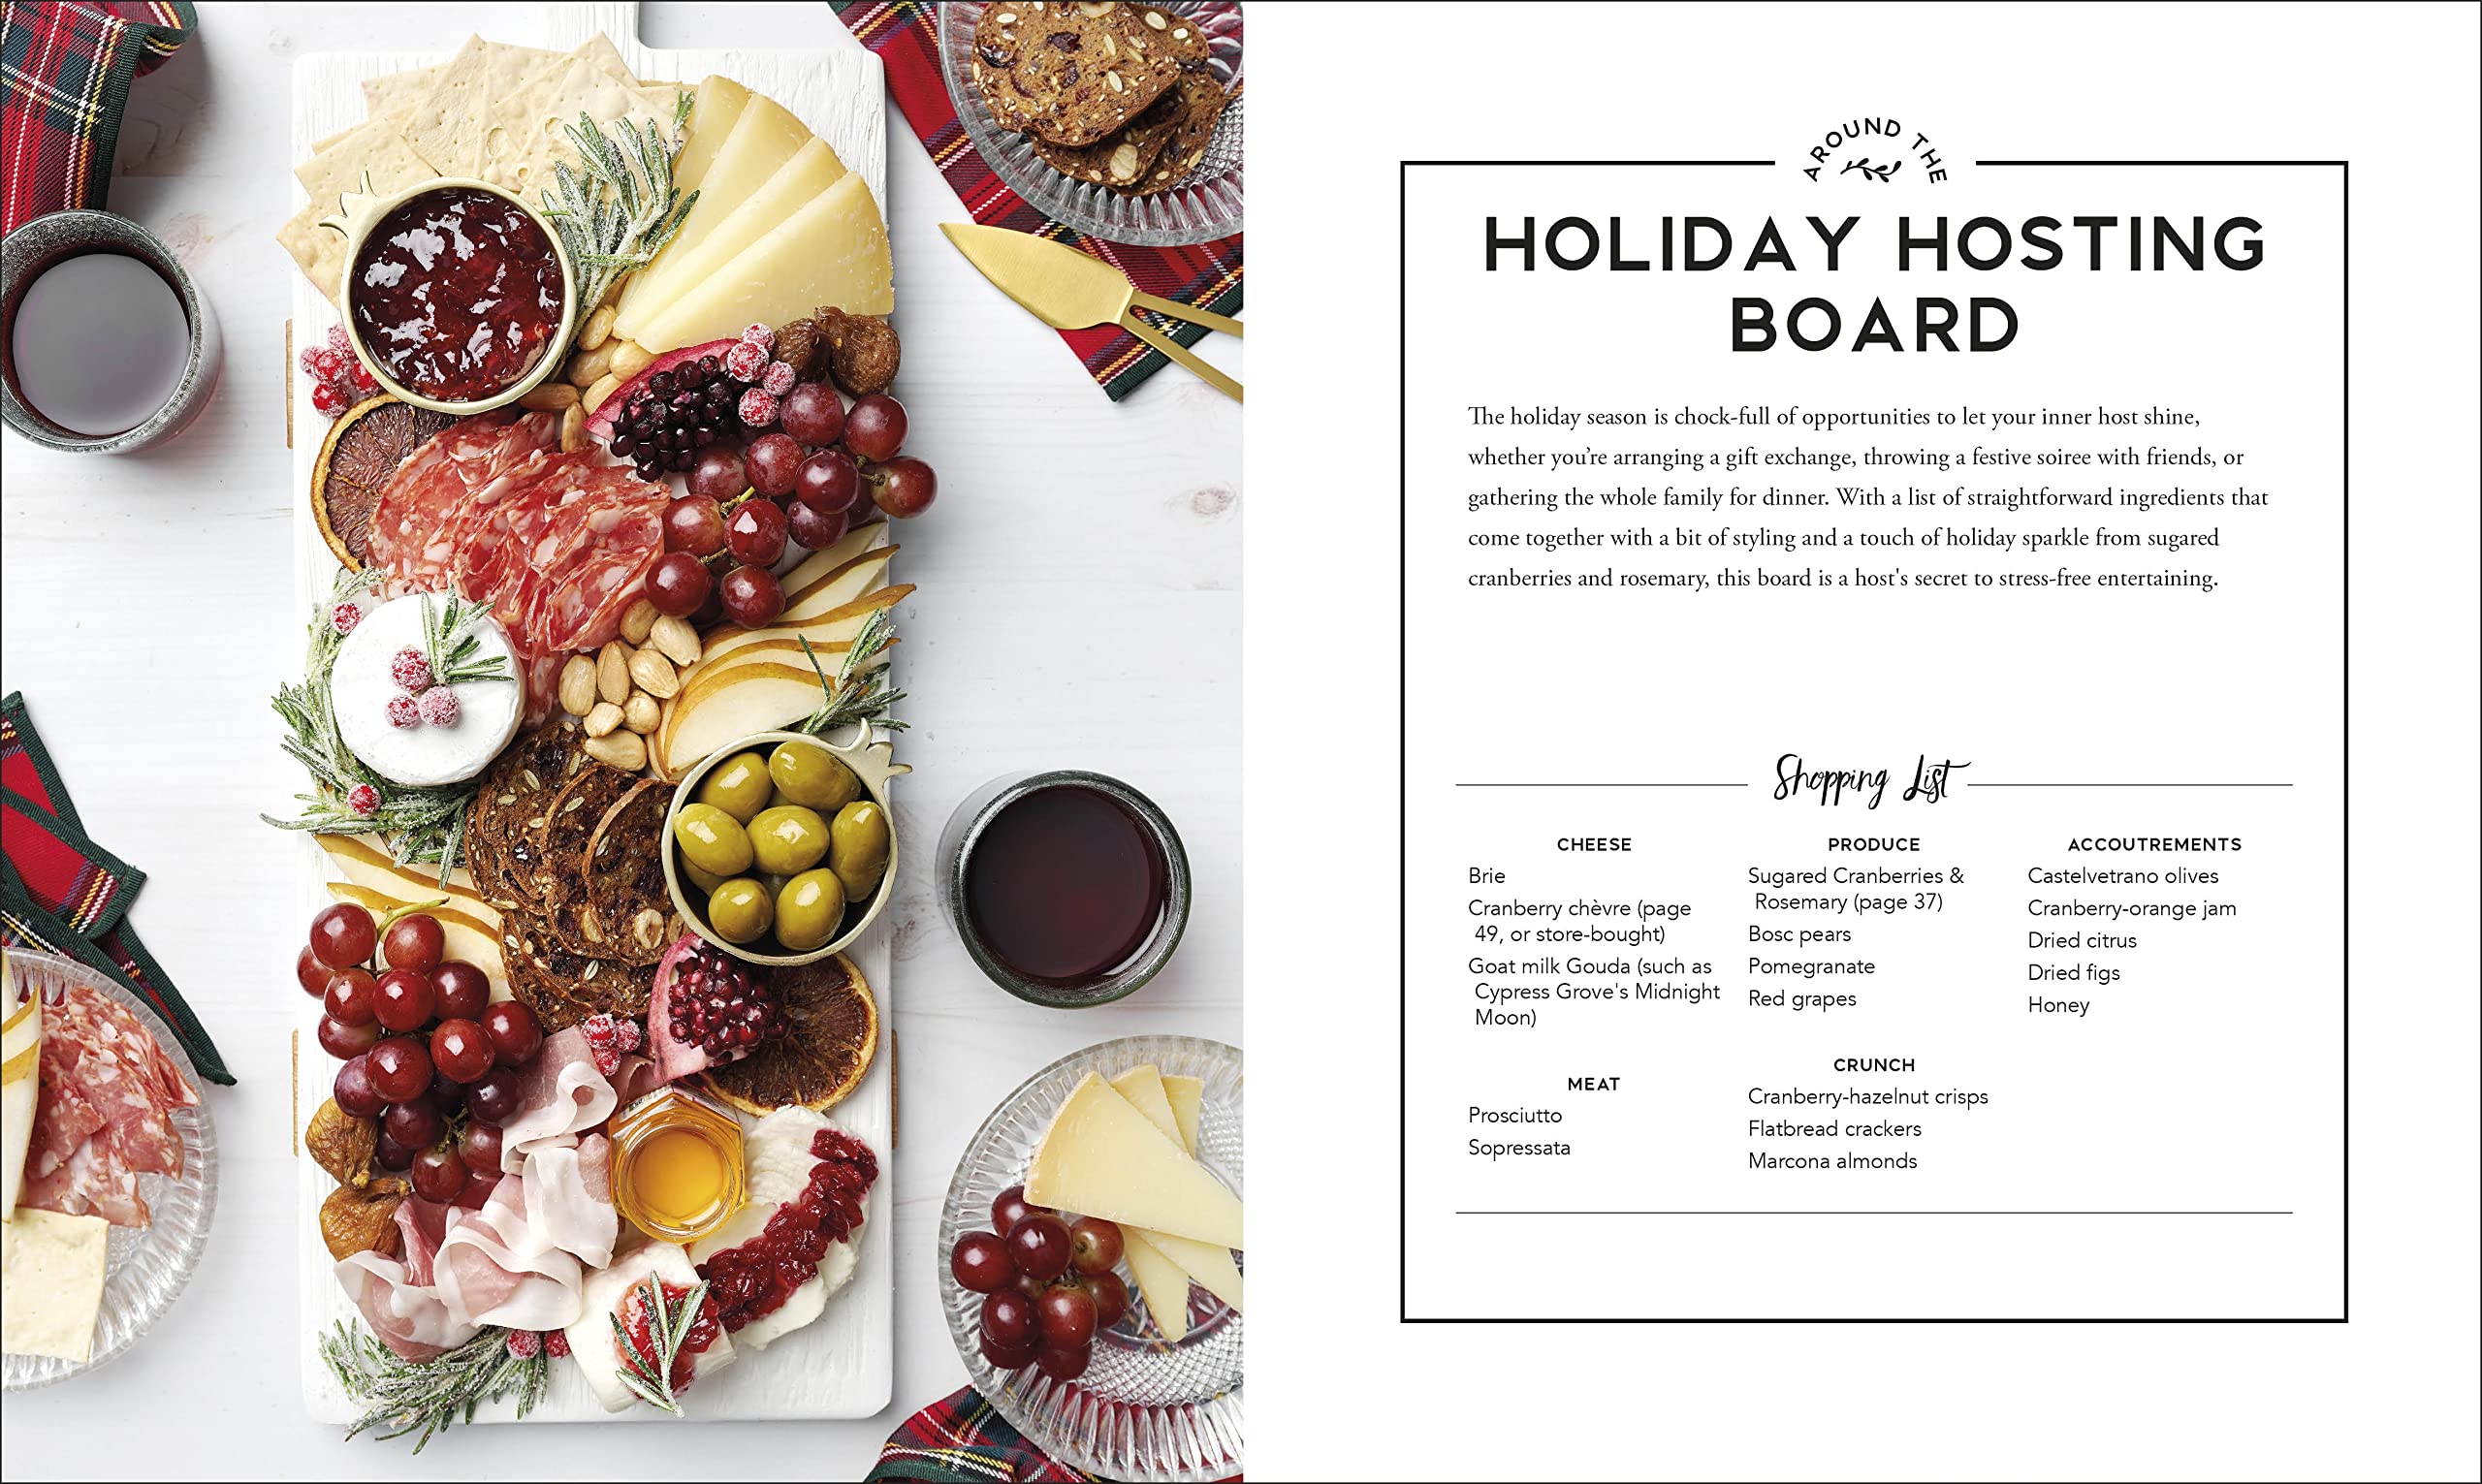 Around the Board: Boards, Platters, and Plates: Seasonal Cheese and Charcuterie for Year-Round Cel